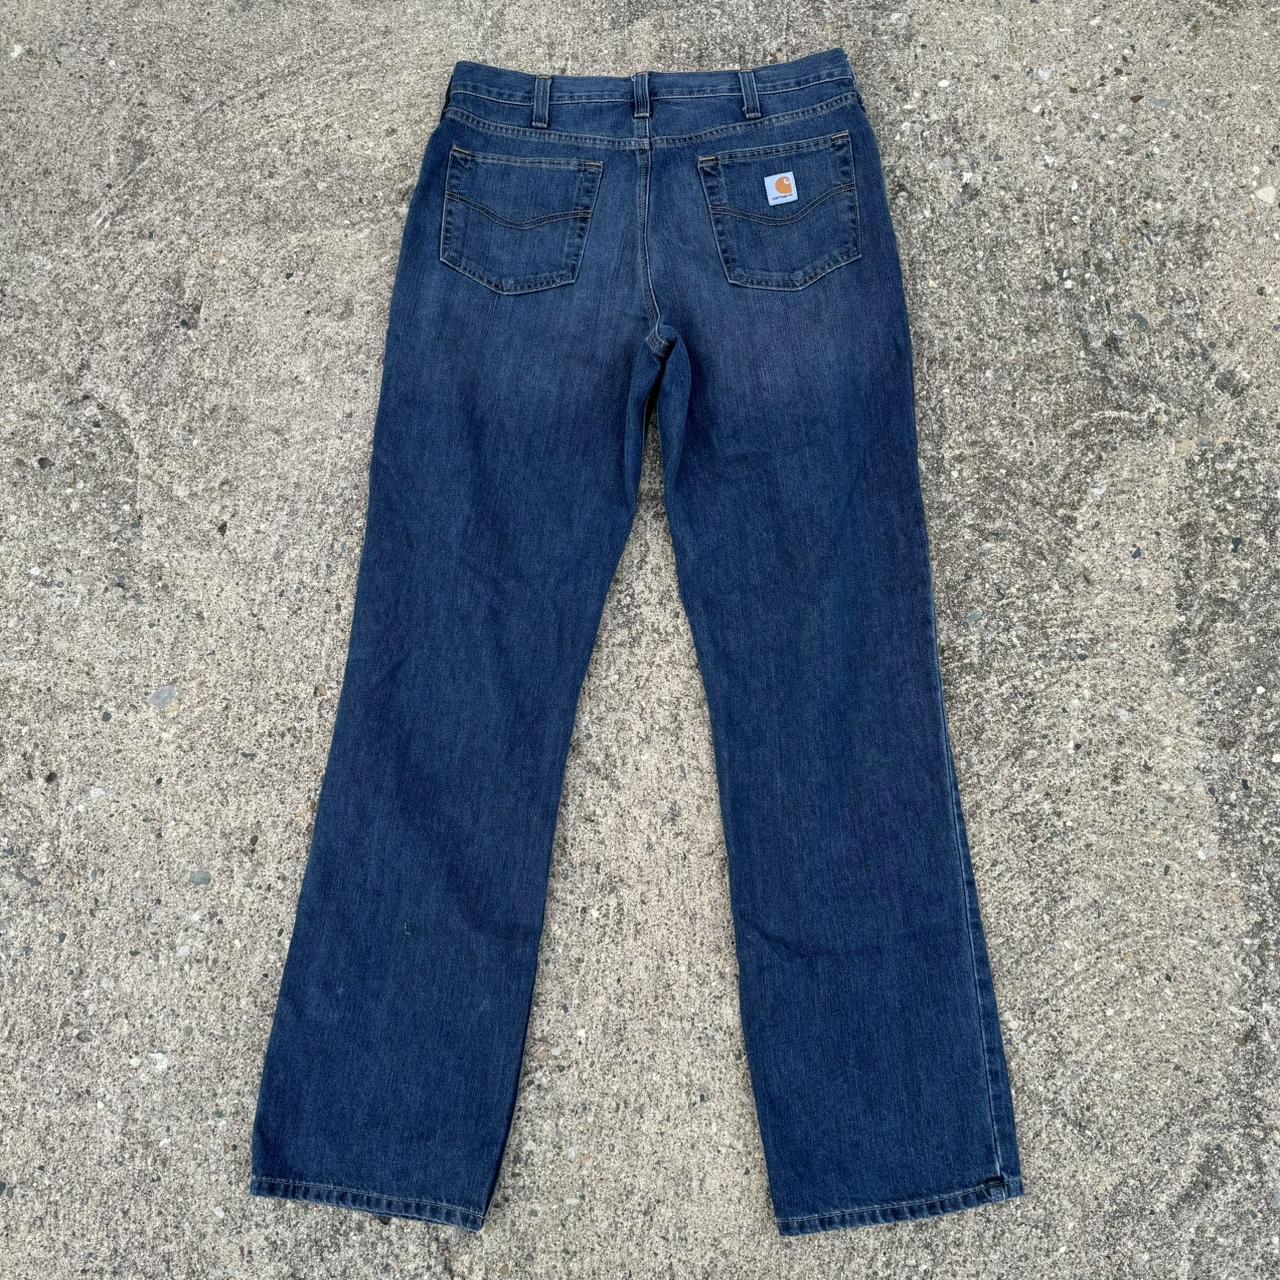 Carhartt Jeans Super dope pair of jeans! Size... - Depop